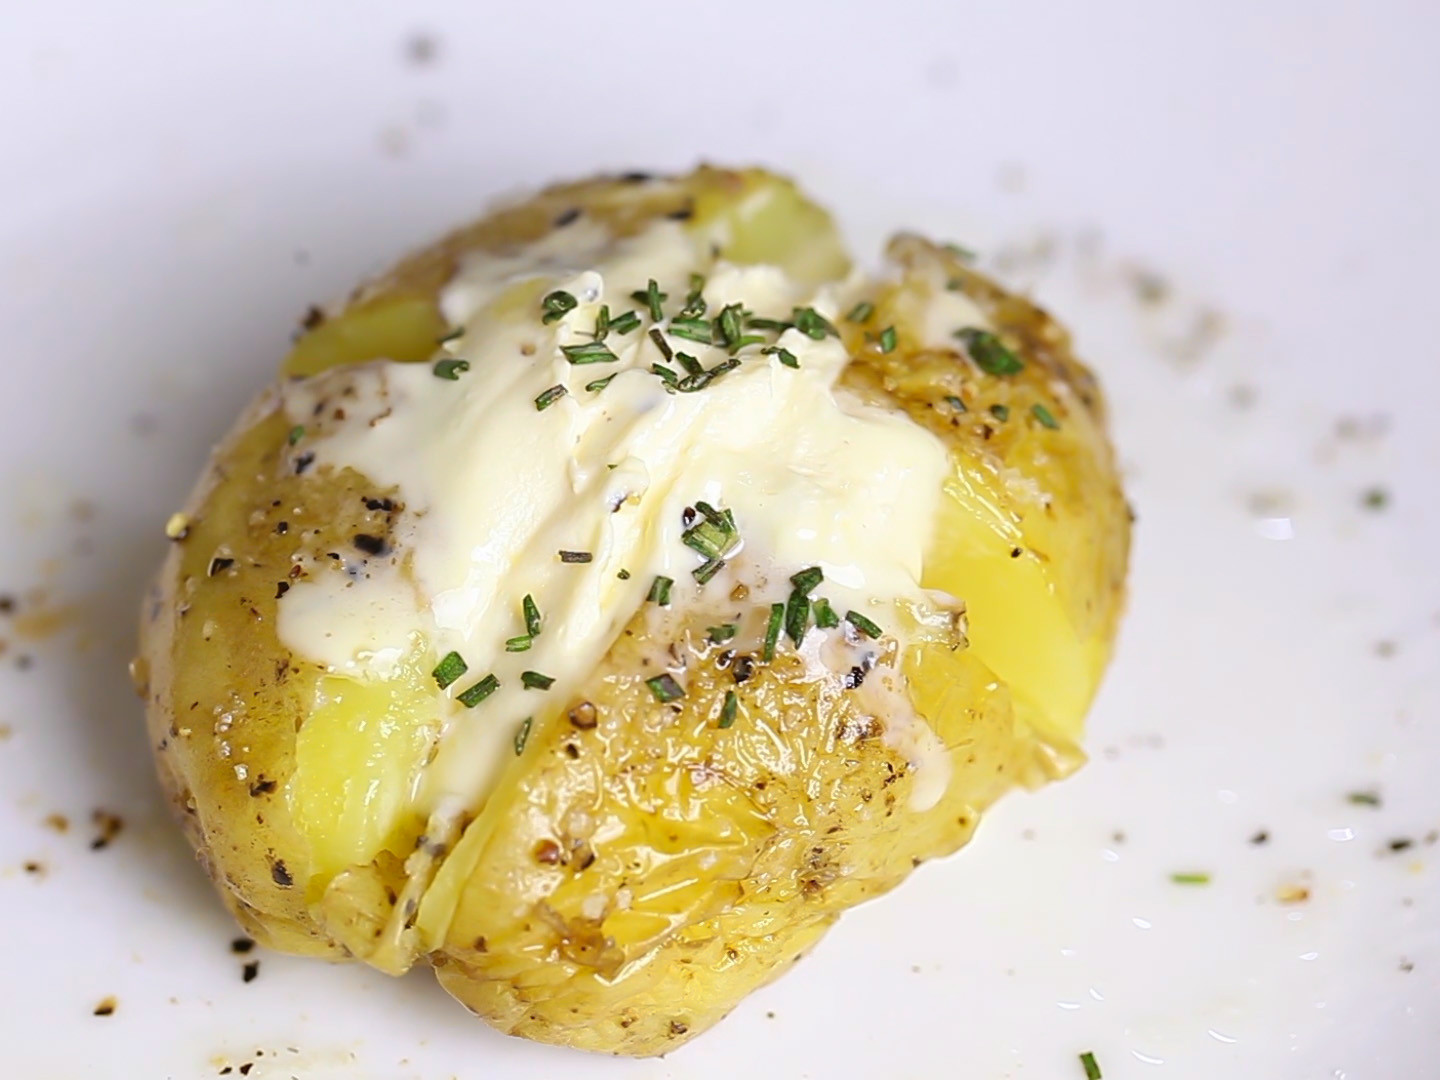 Microwaved Baked Potato
 How to Bake a Potato in the Microwave 9 Steps with